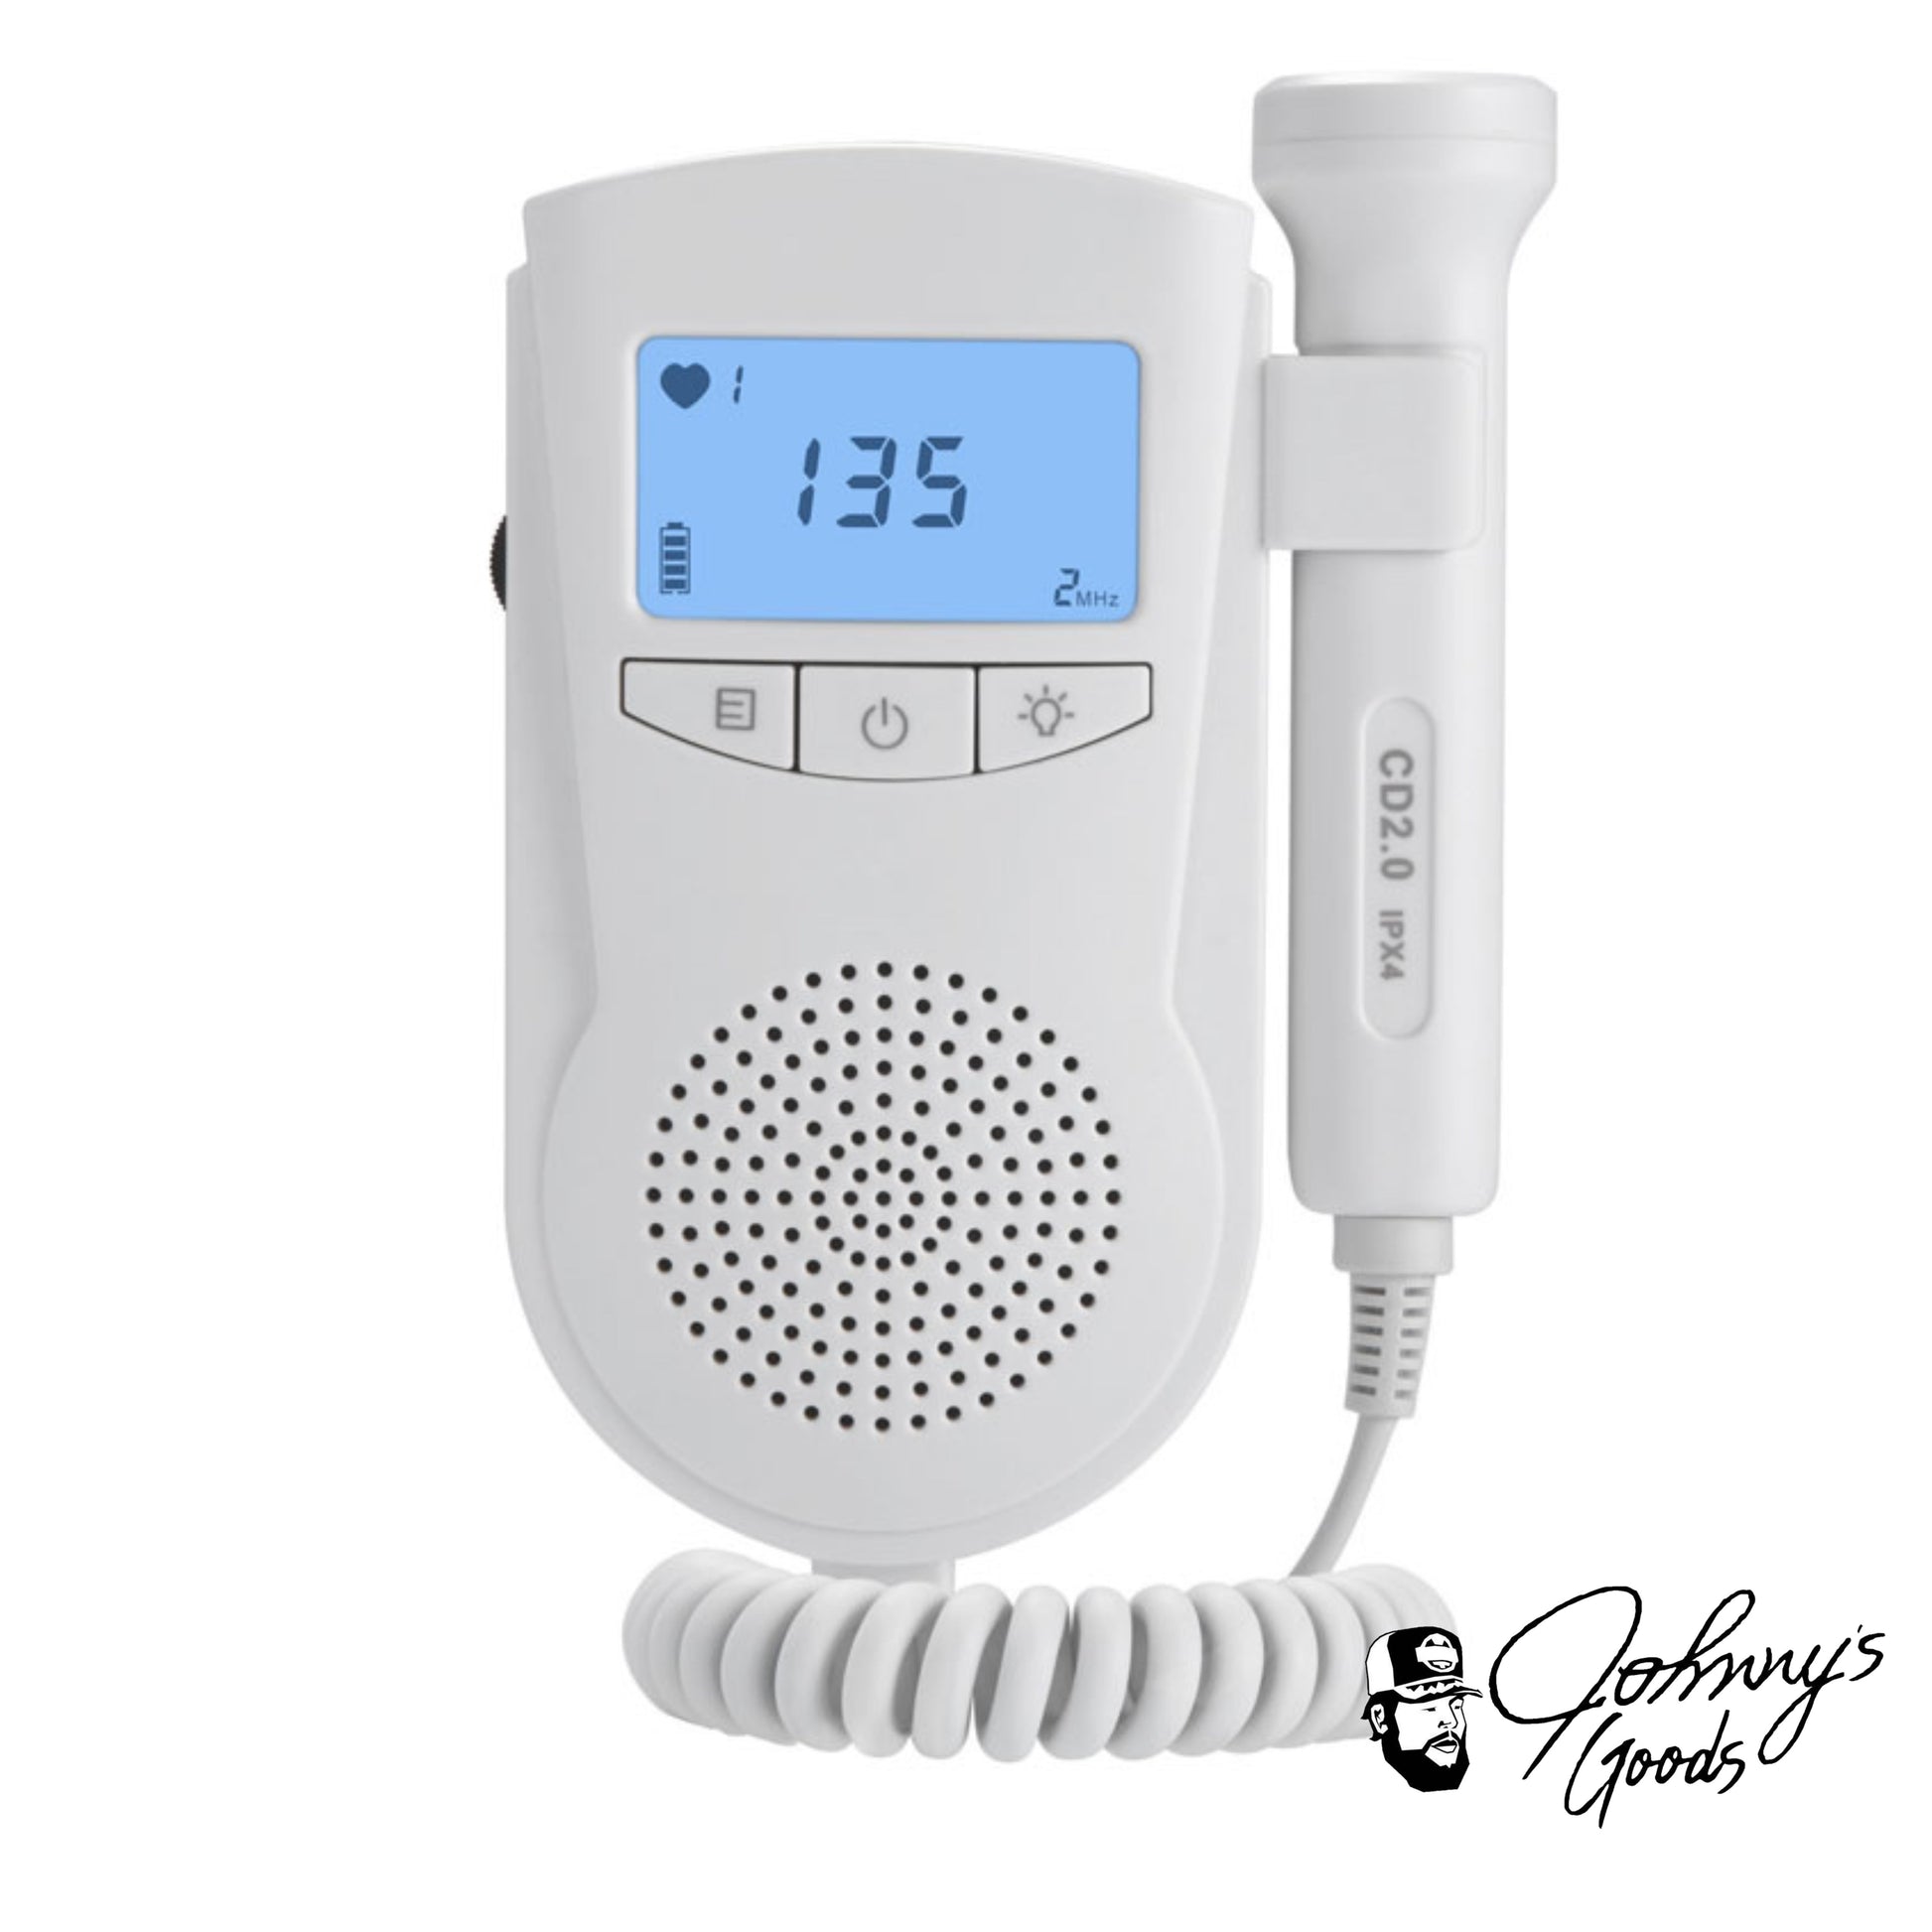 How to Use a Fetal Doppler 